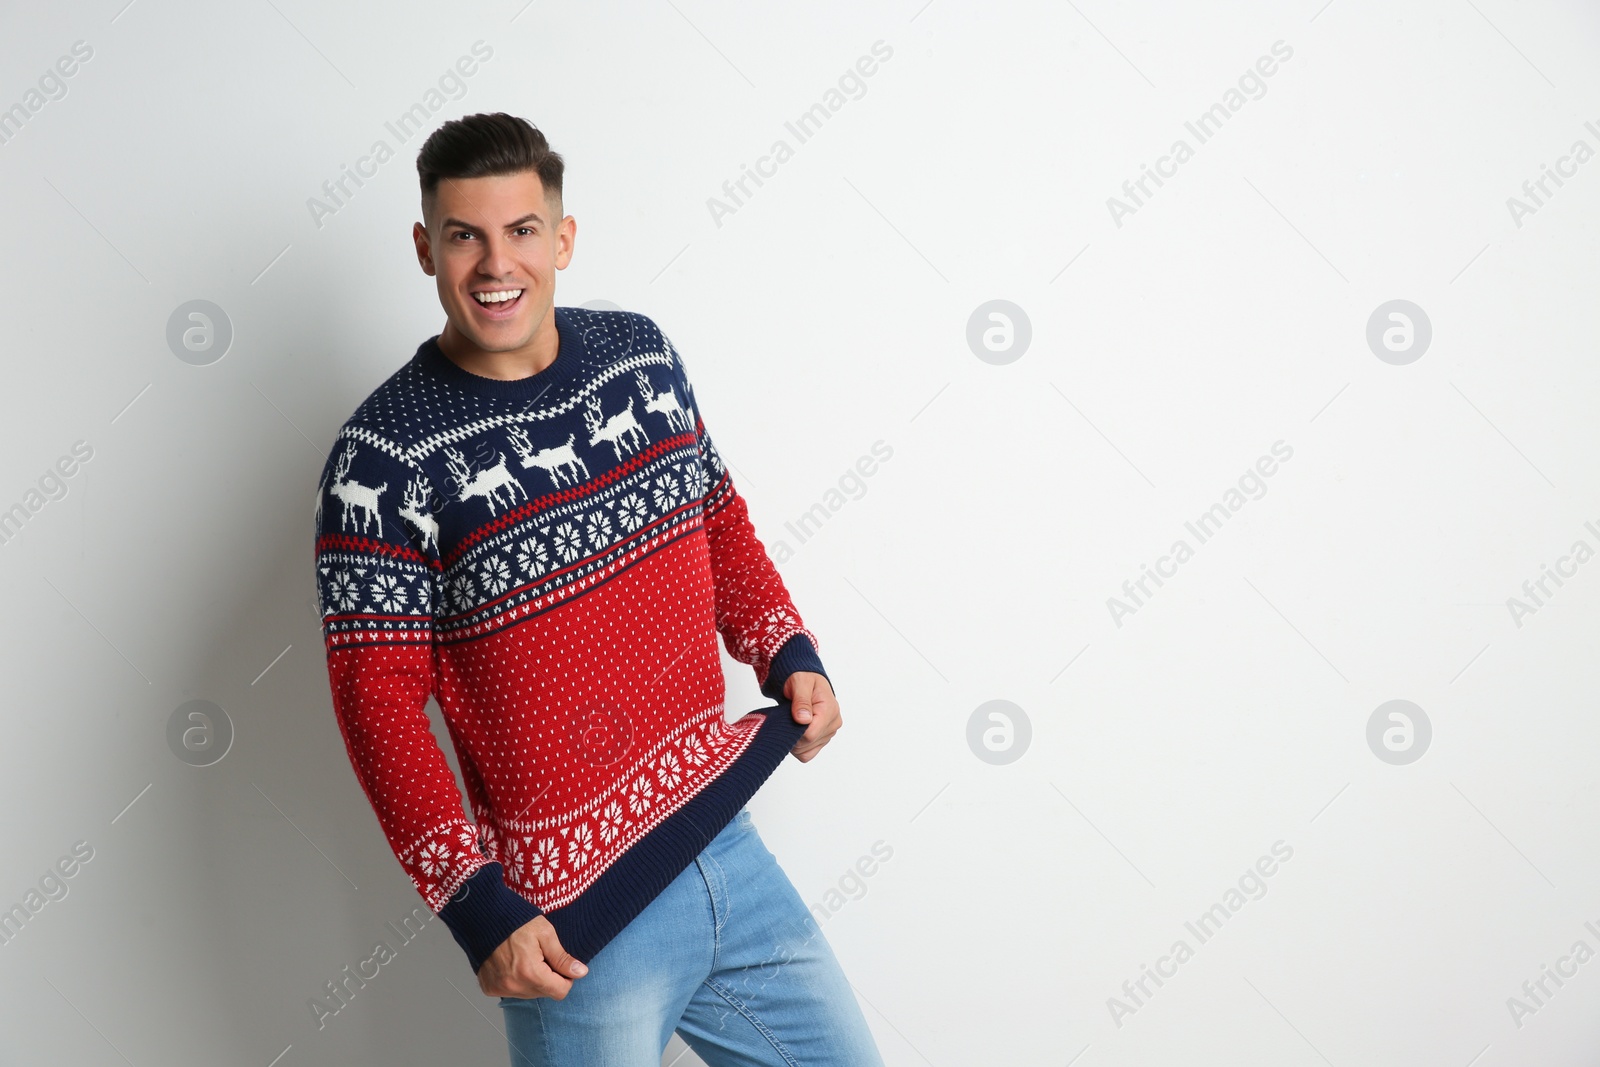 Photo of Happy man showing his Christmas sweater on white background, space for text